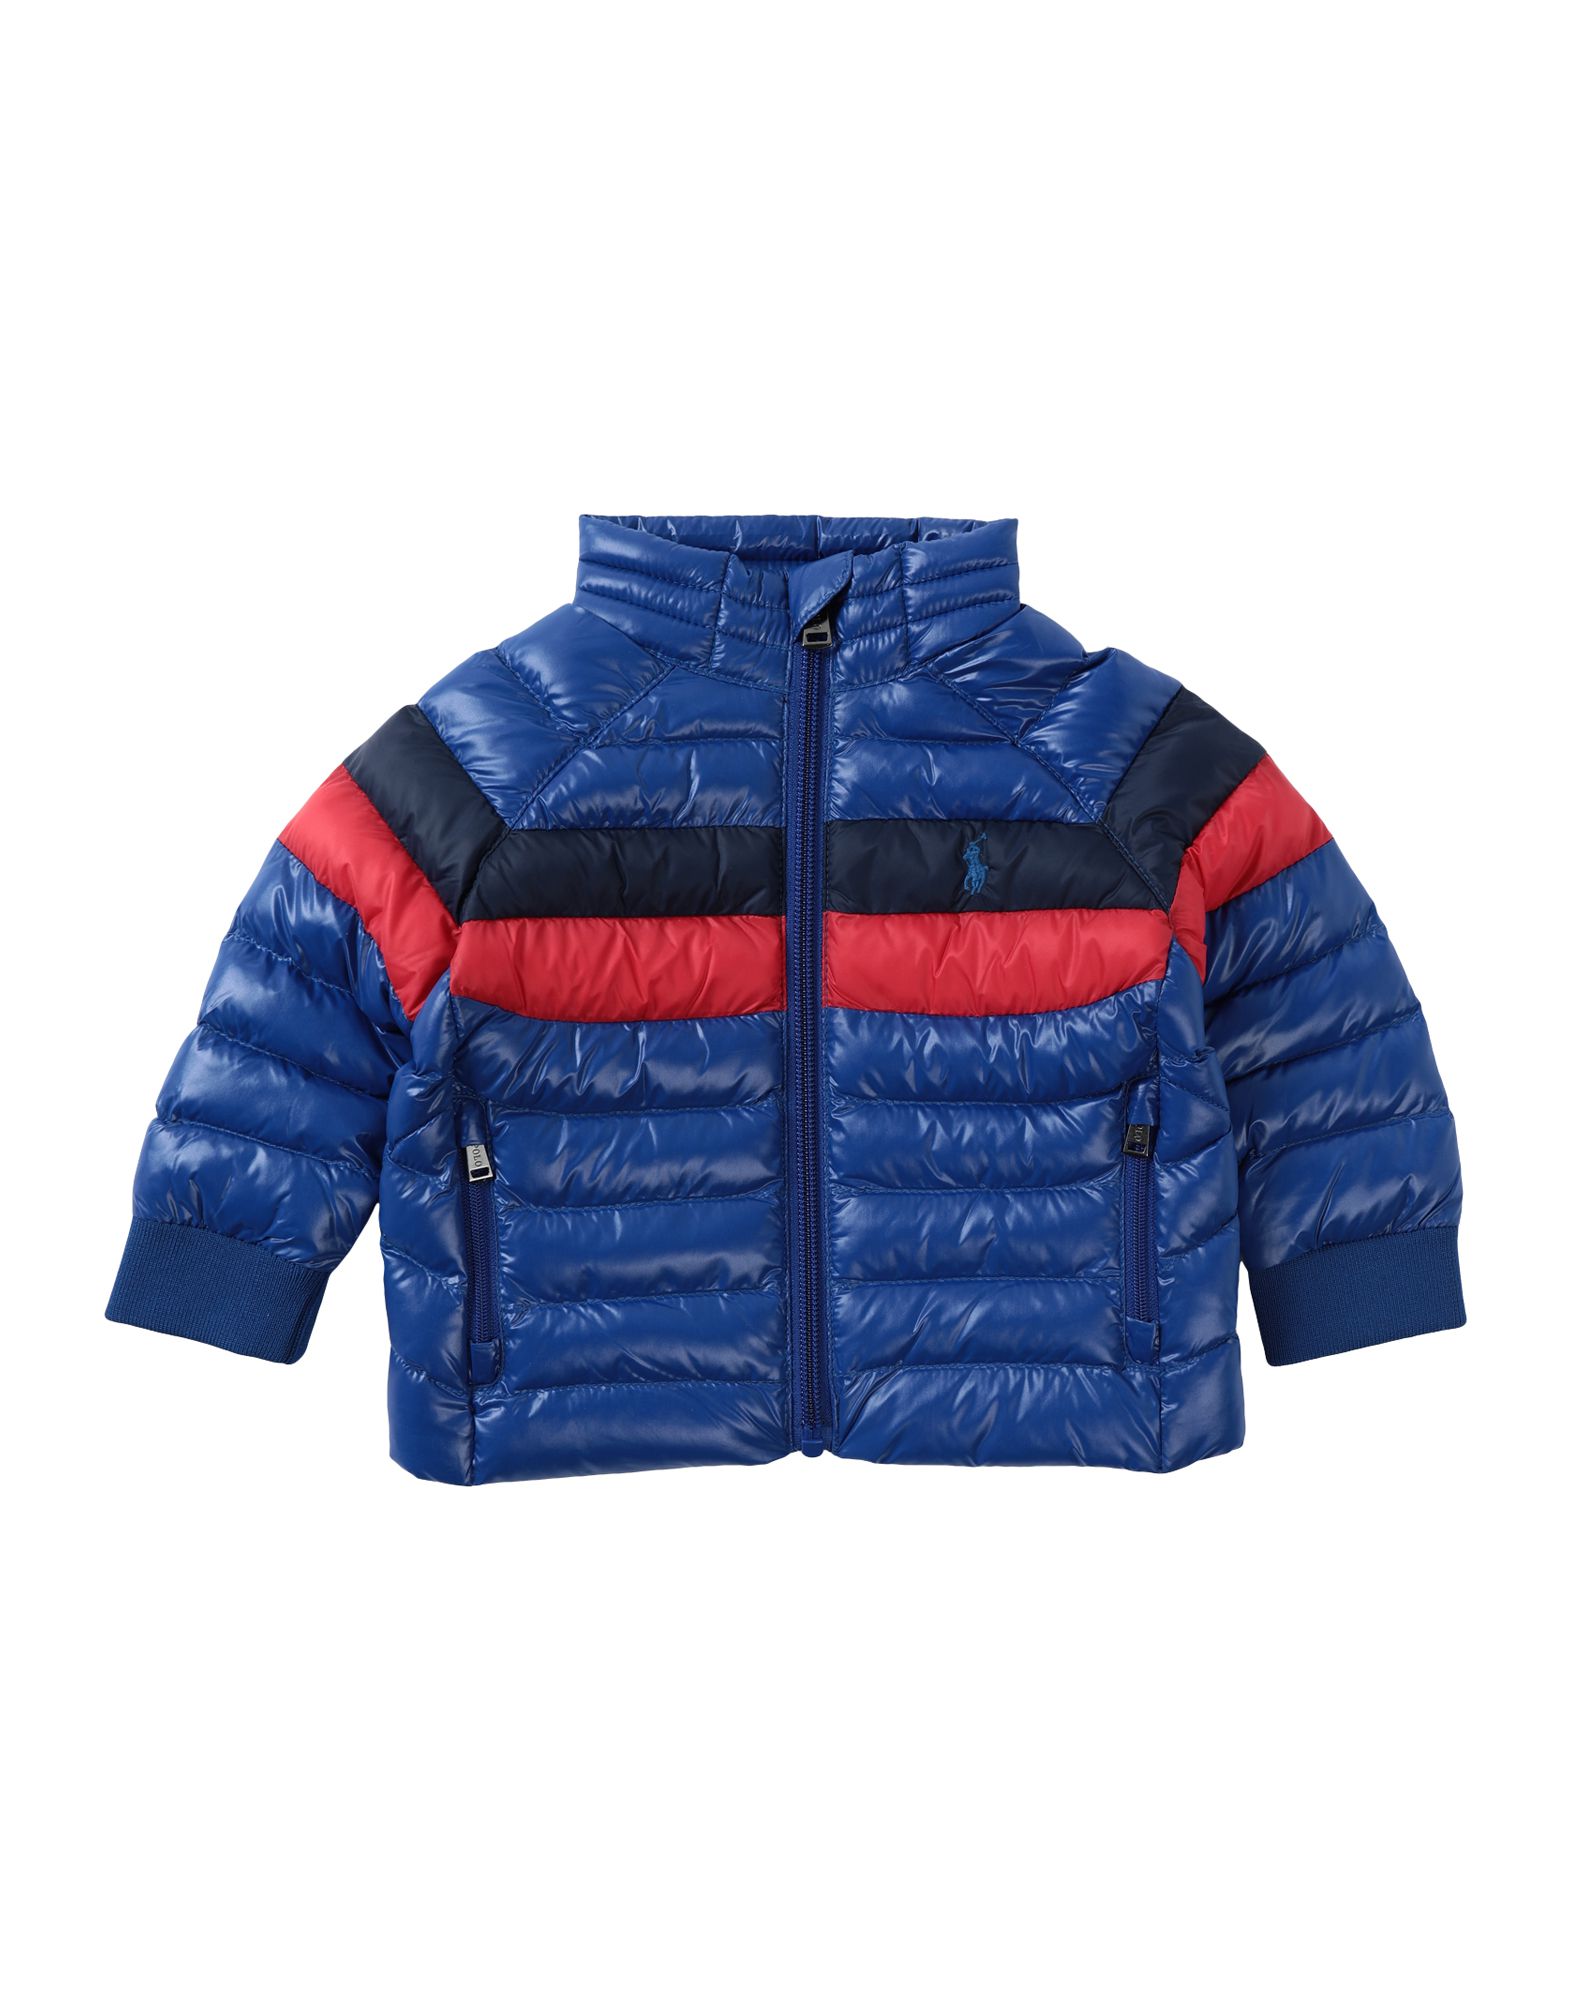 ＜YOOX＞ ★RALPH LAUREN ボーイズ 0-24 ヶ月 ダウンジャケット ブルー 9 リサイクル ナイロン 100% Packable Quilted Jacket画像